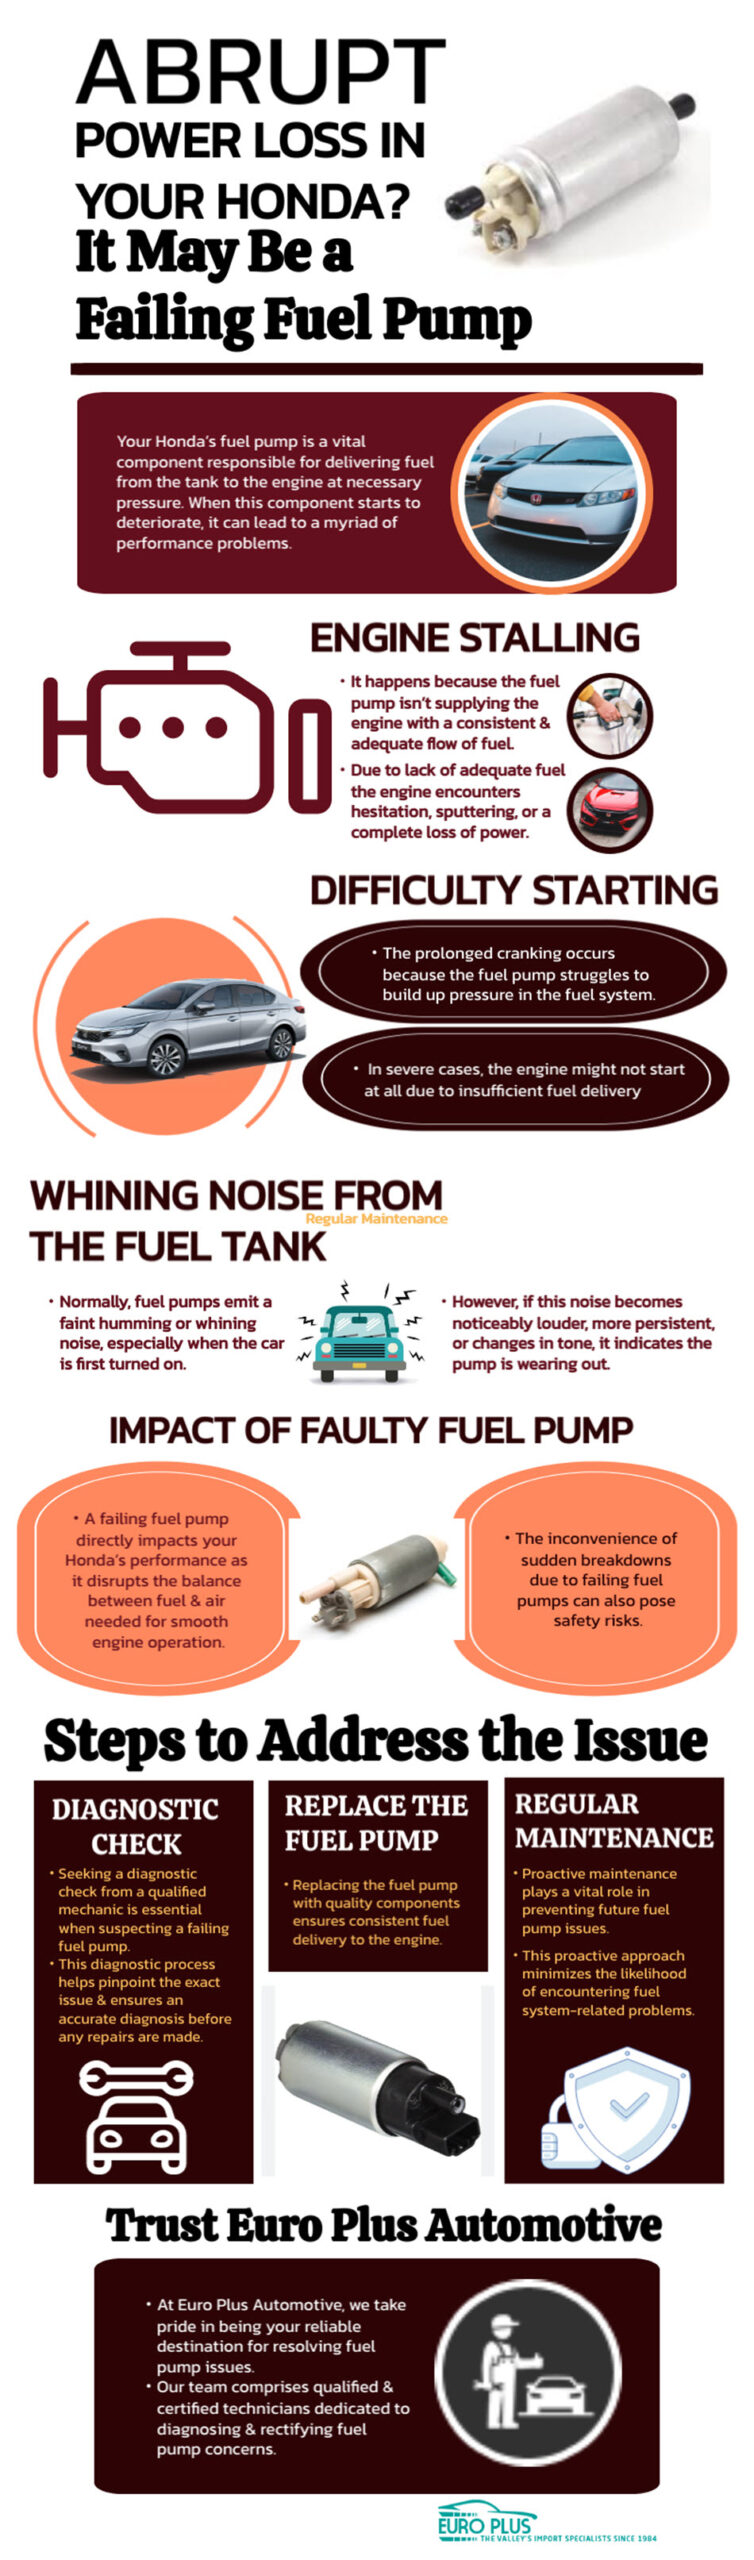 Potential Fuel Pump Issues Leading To Sudden Power Loss In Your Honda